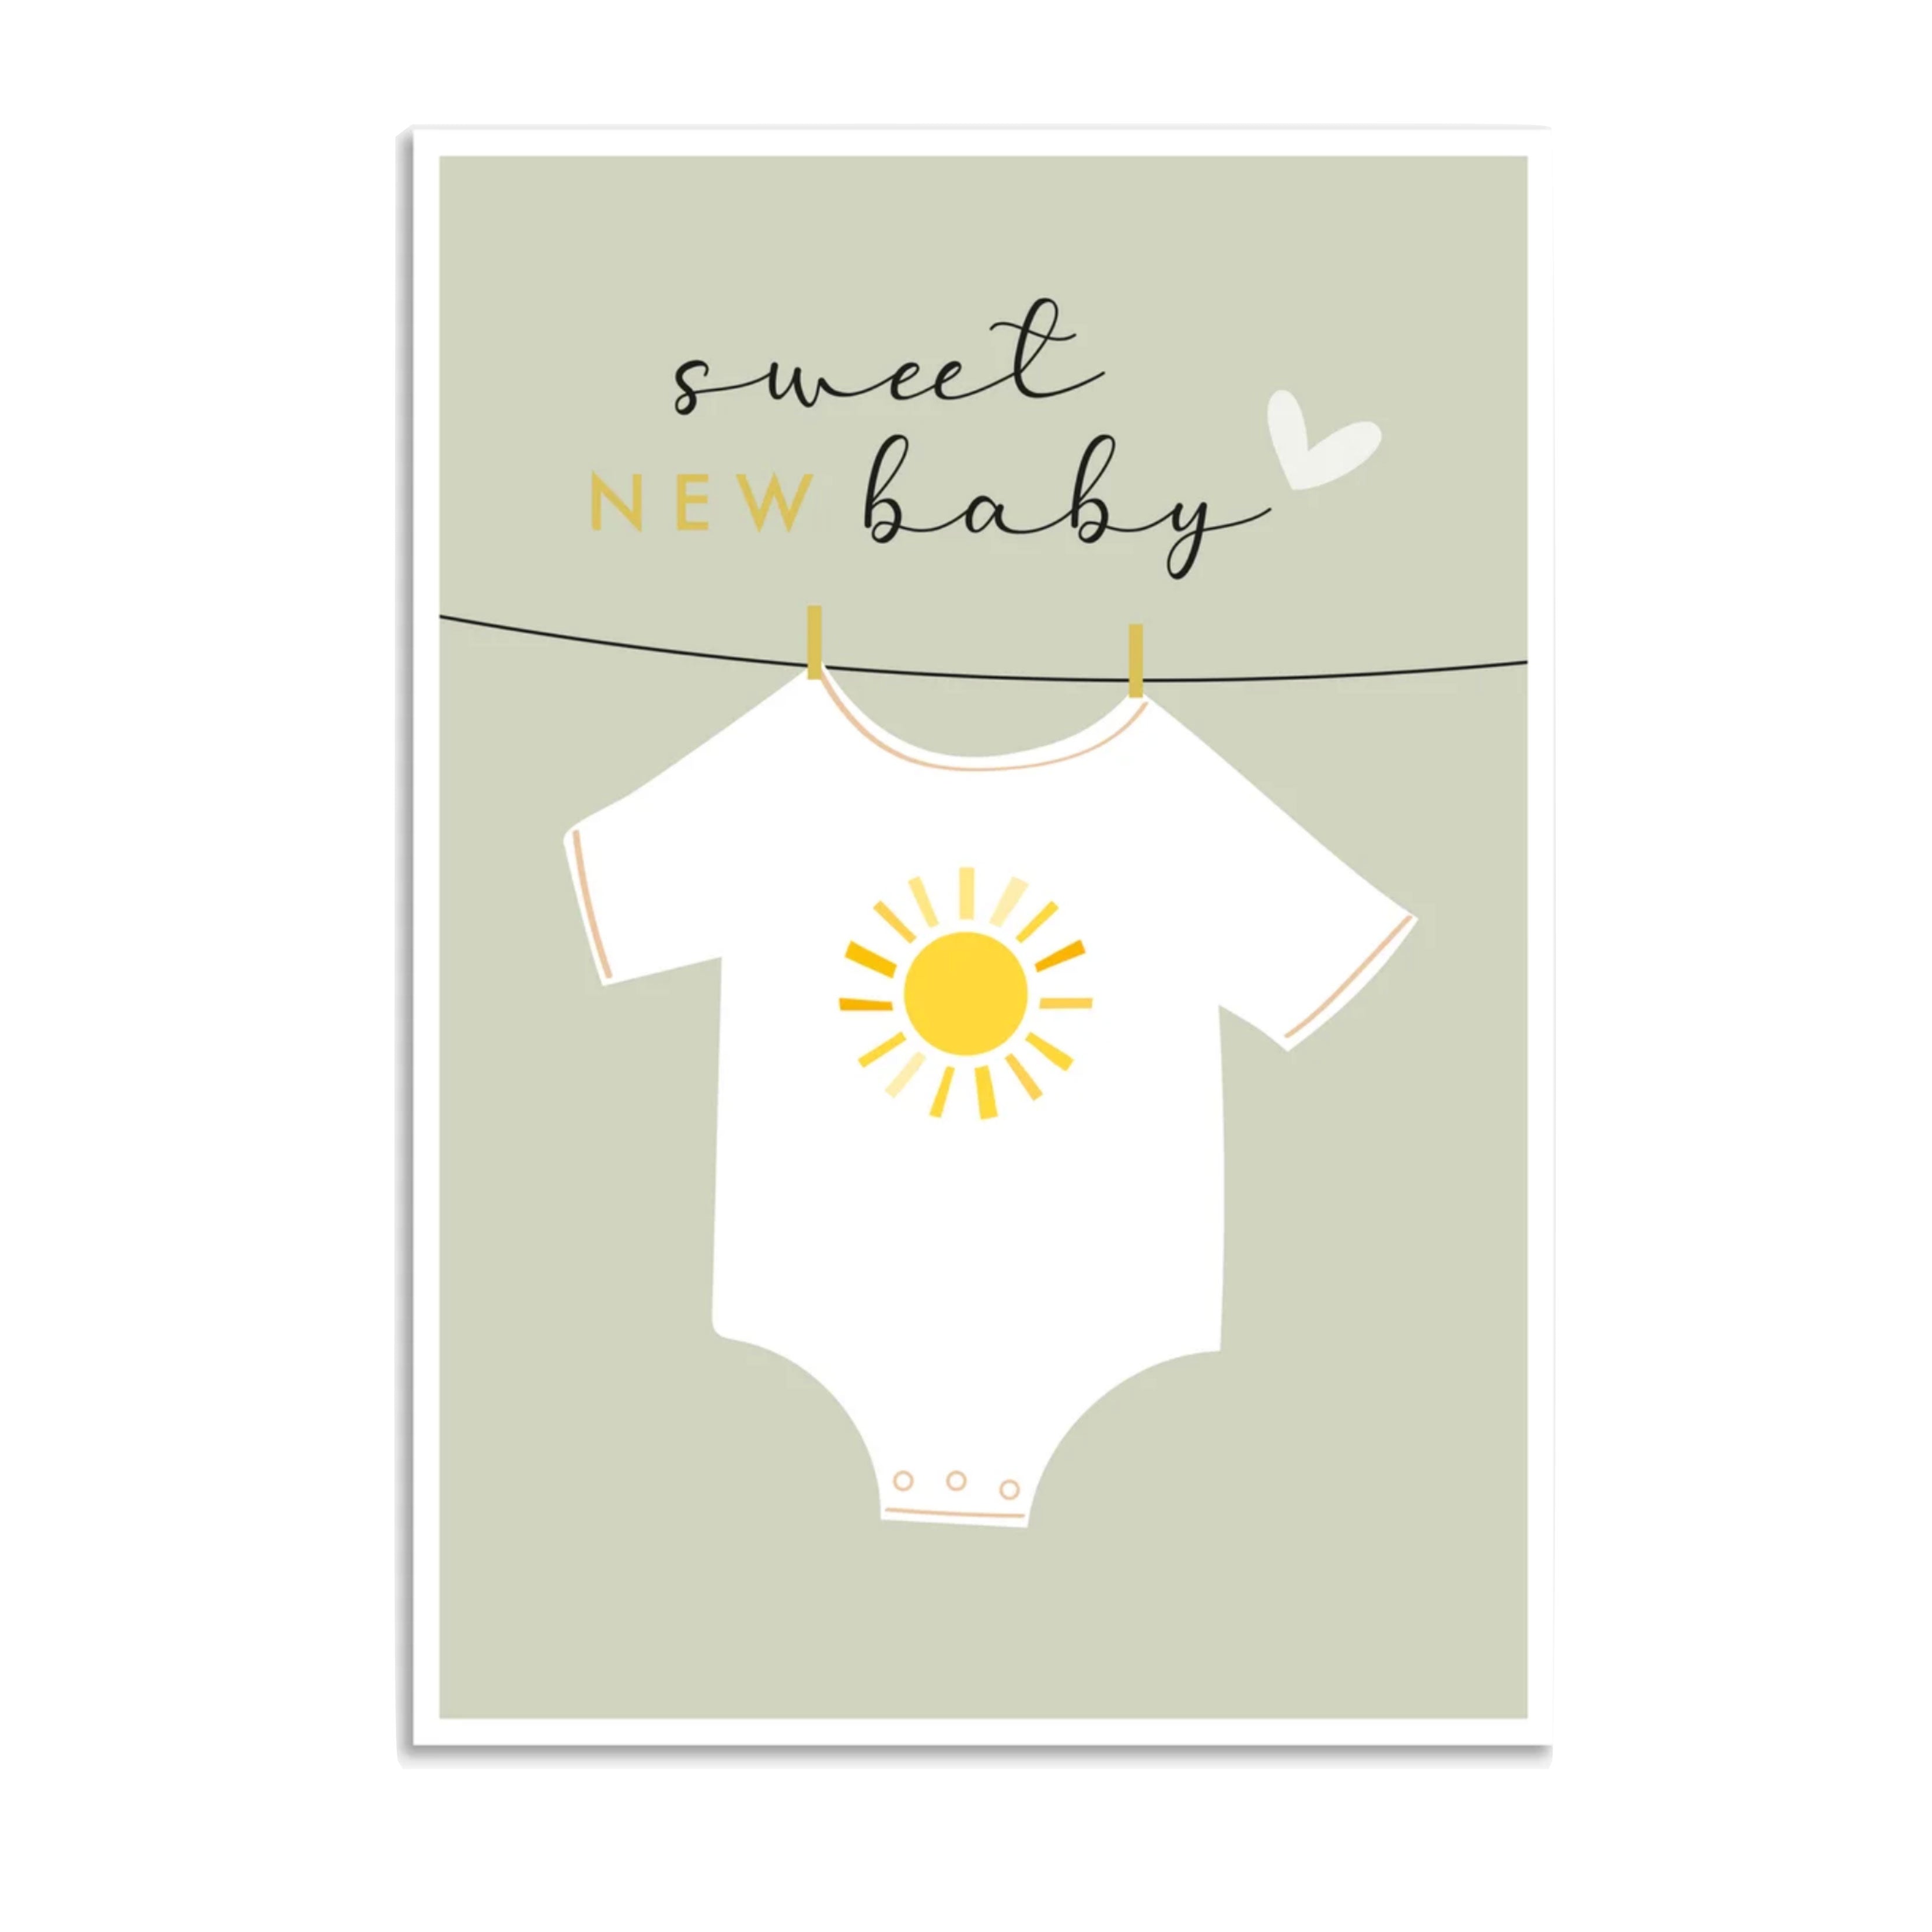 Neutral Greeting Card for a New Baby at Bonjour Baby Baskets